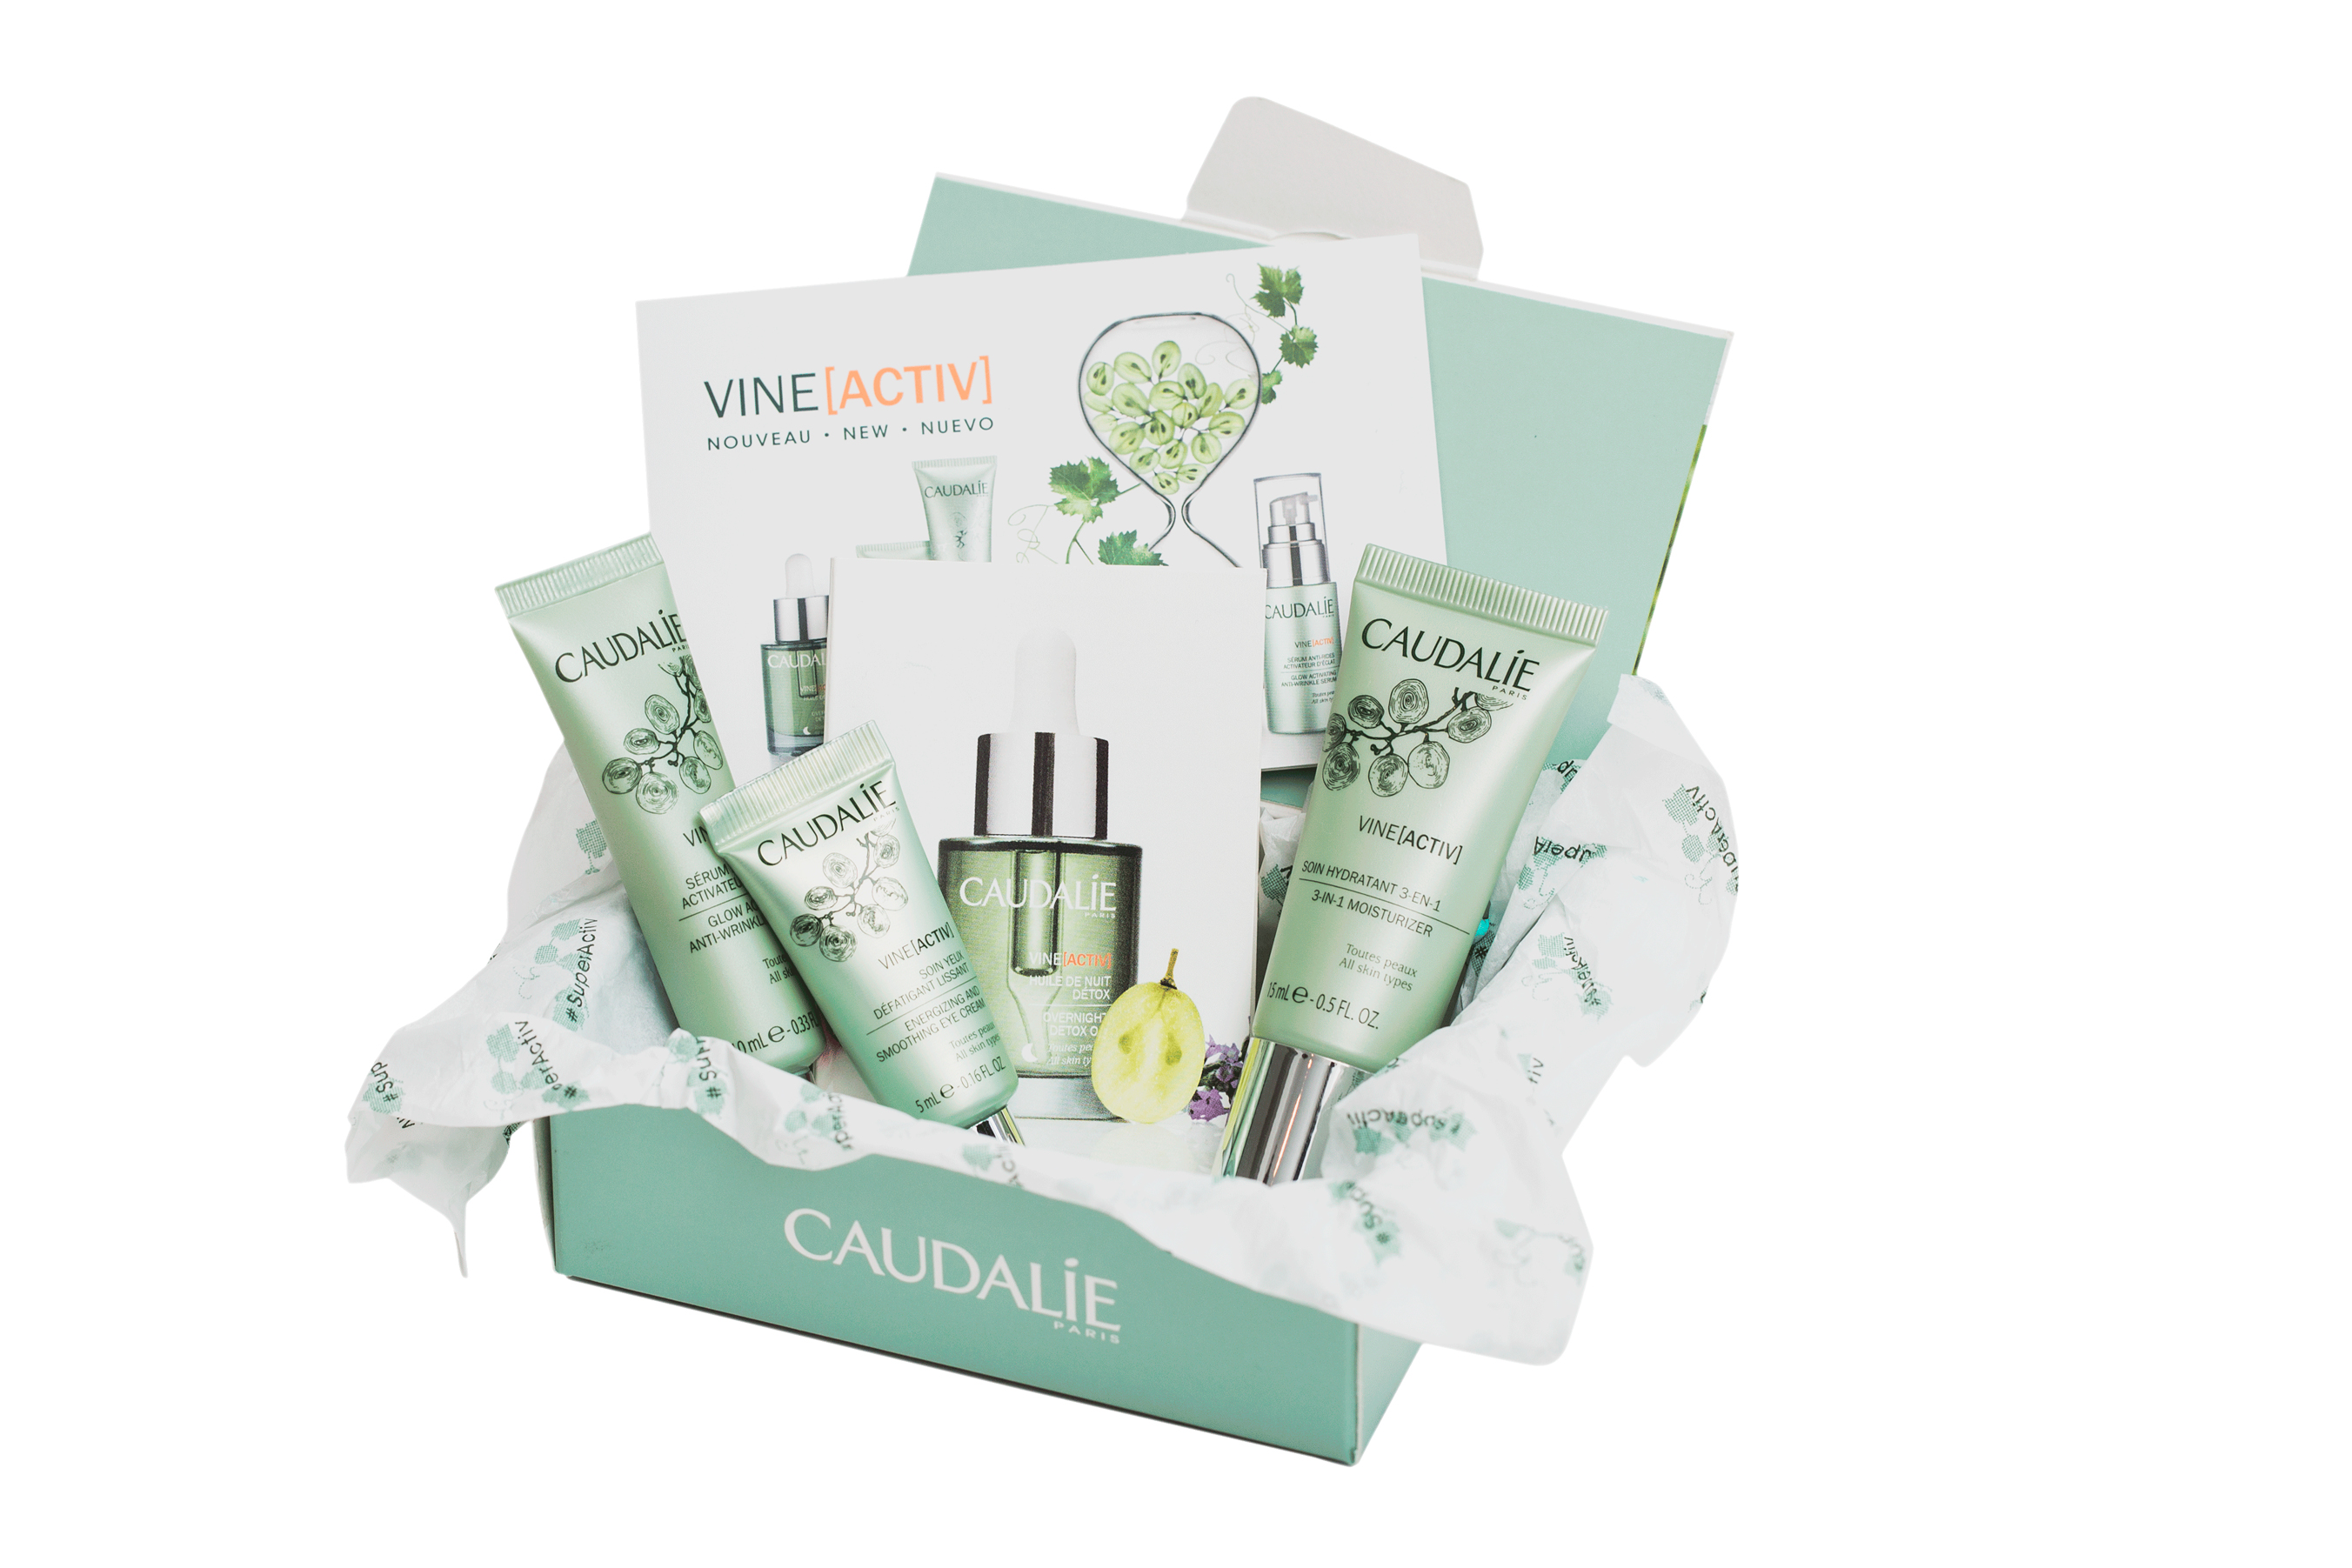 Caudalie's new Vin(Activ) facial and a special gift for our readers